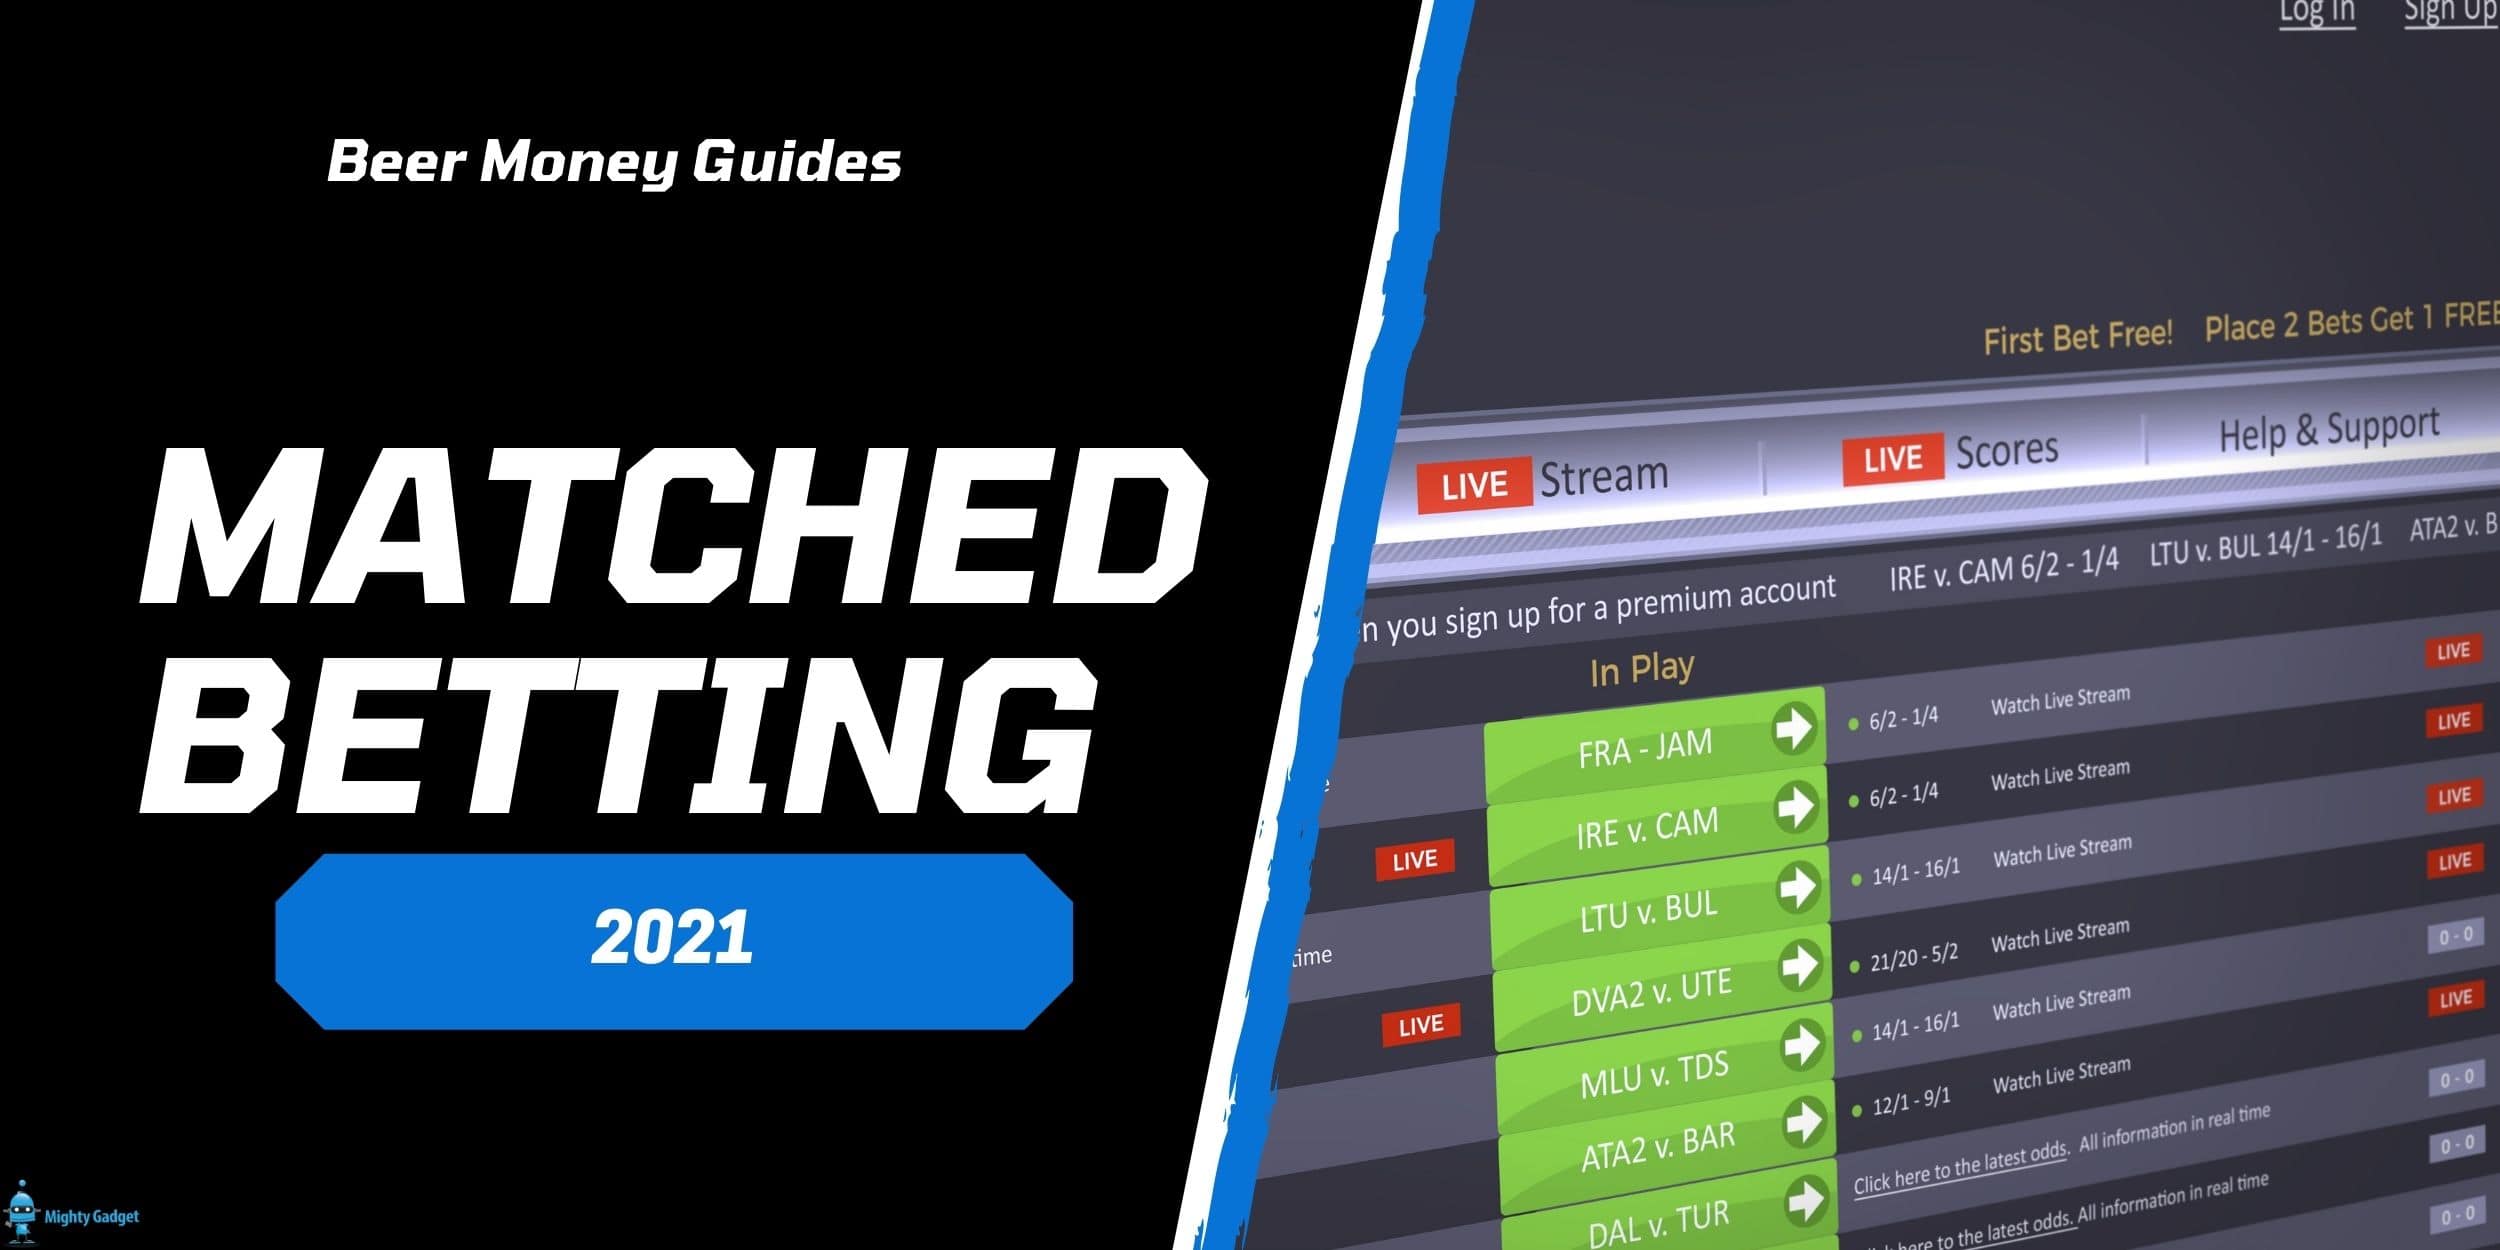 What is matched betting, and does it still work in 2021? [Beer Money 2021]